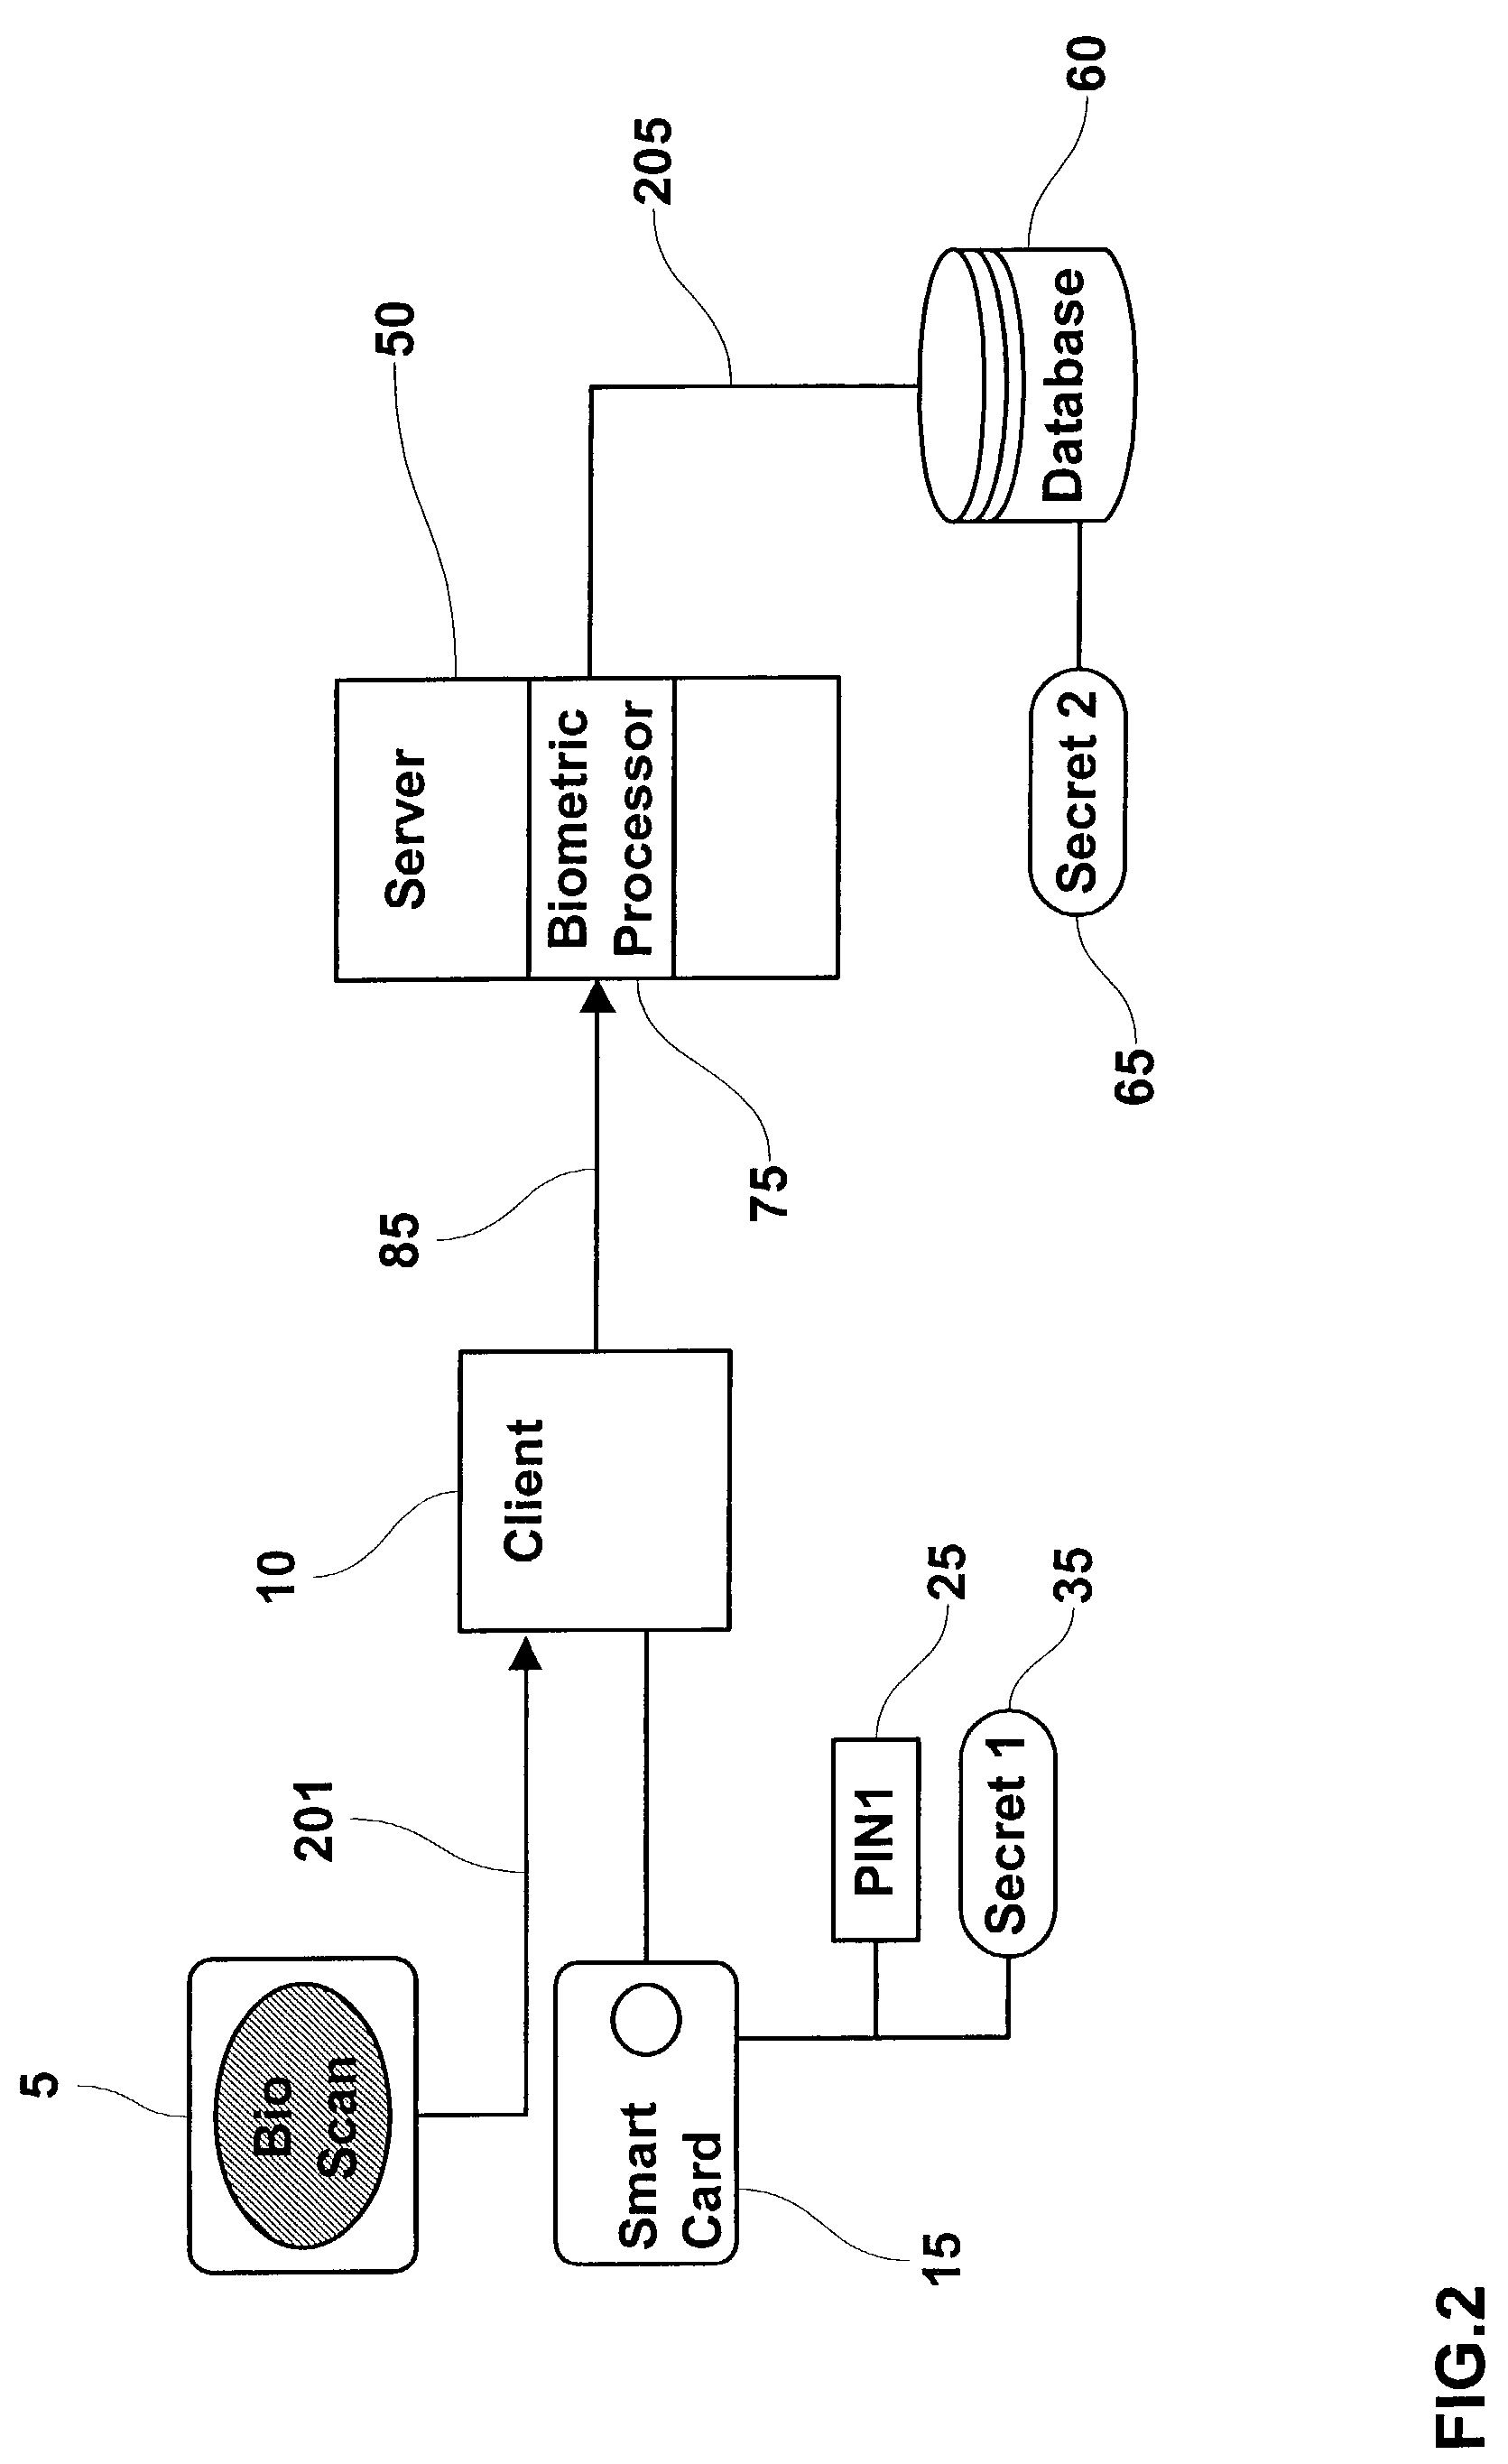 System and method to facilitate separate cardholder and system access to resources controlled by a smart card